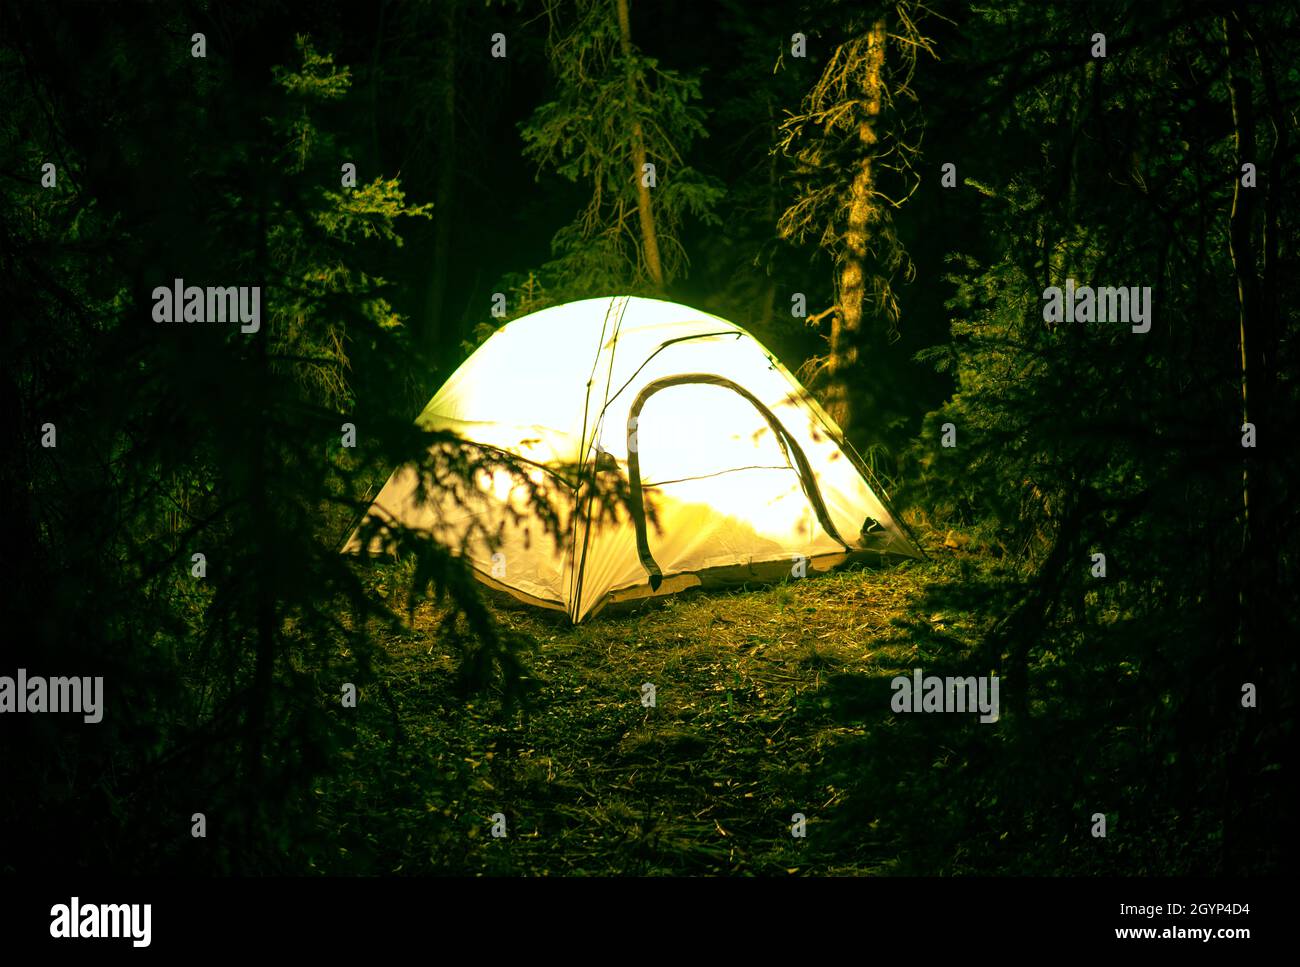 Illuminated Tent In Pine Tree Forest At Night Camping Concept Stock Photo